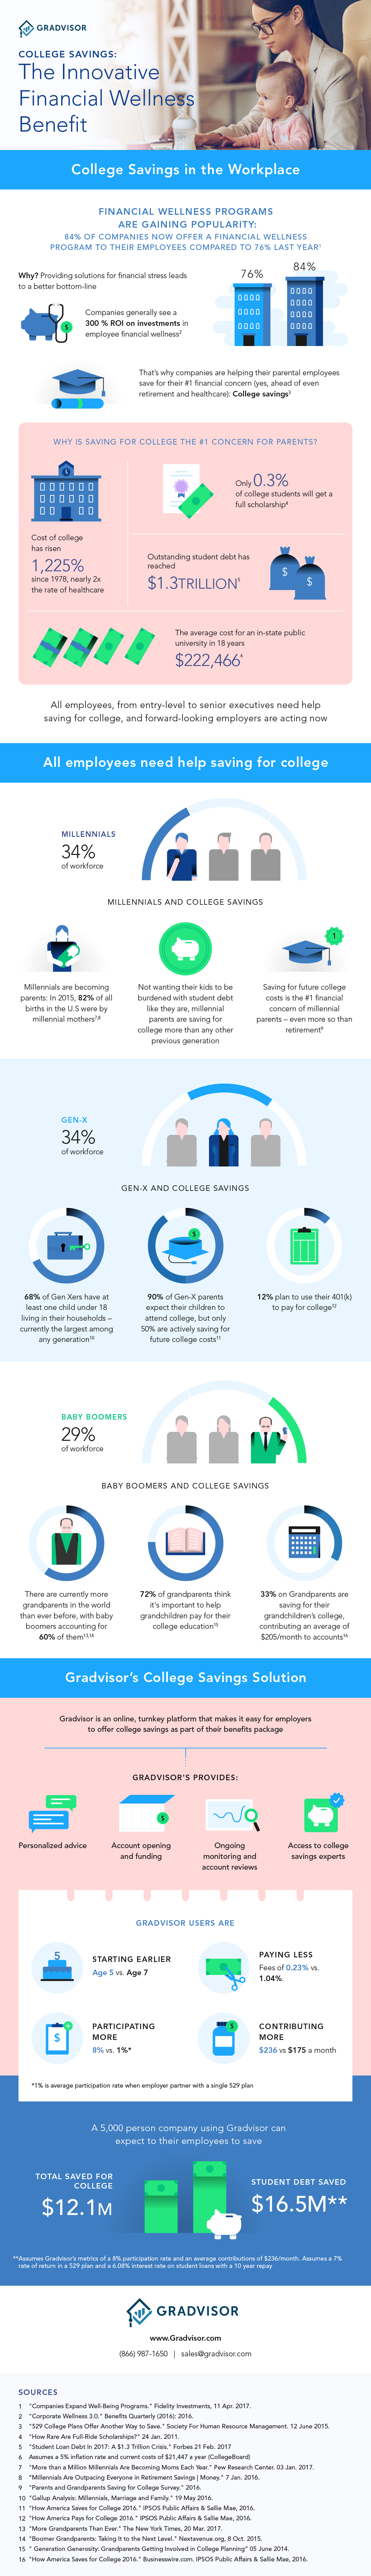 Infographic for College Savings: The Statistics You Need to Know